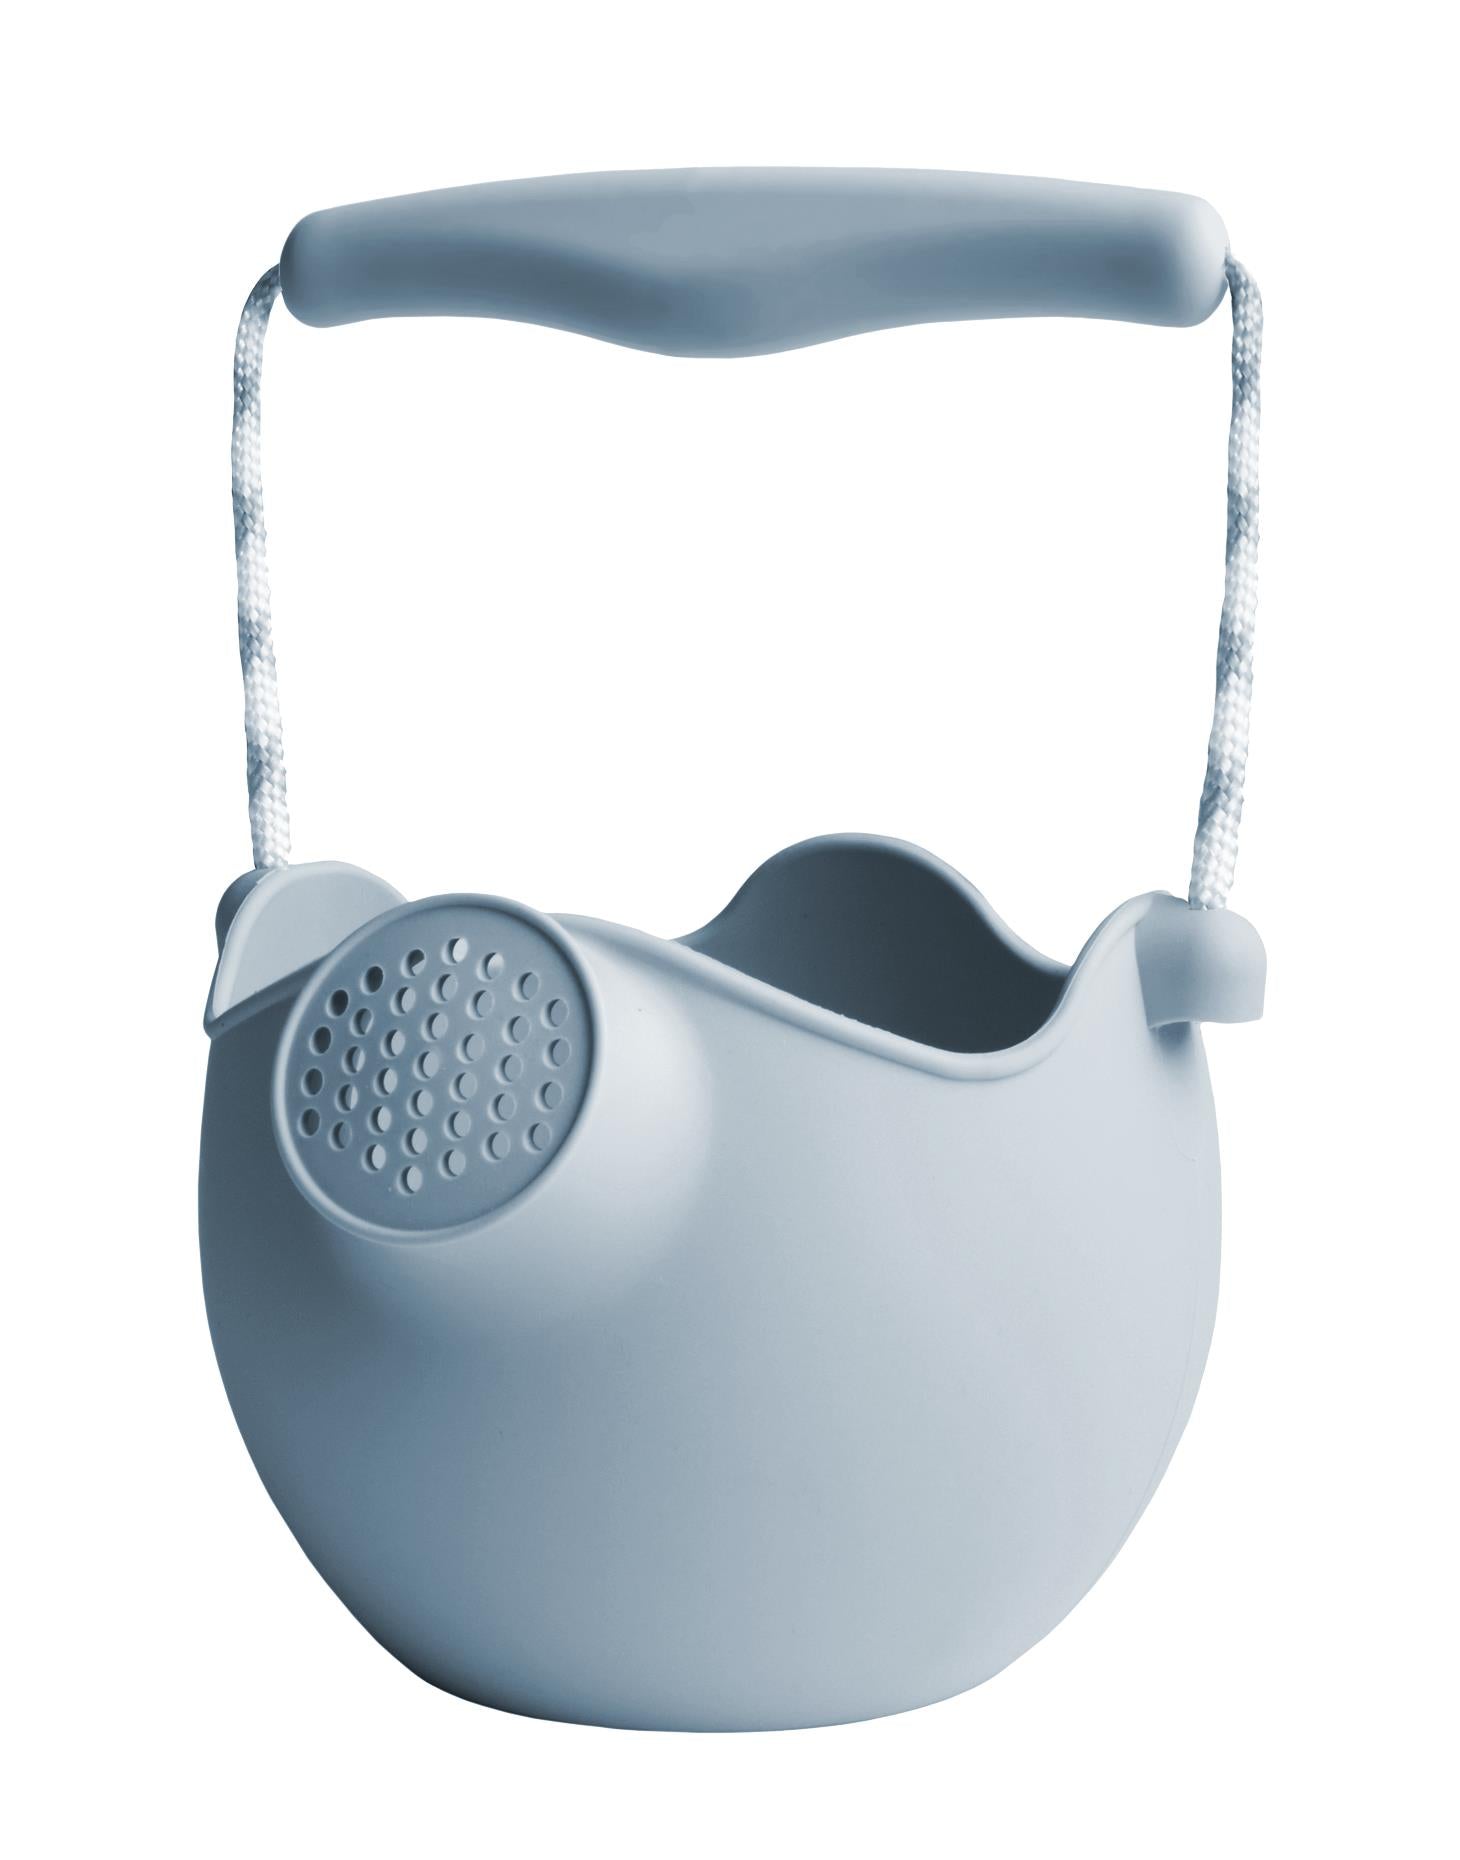 Scrunch Watering Can - Duck Egg Blue-Toys-Scrunch-The Bay Room